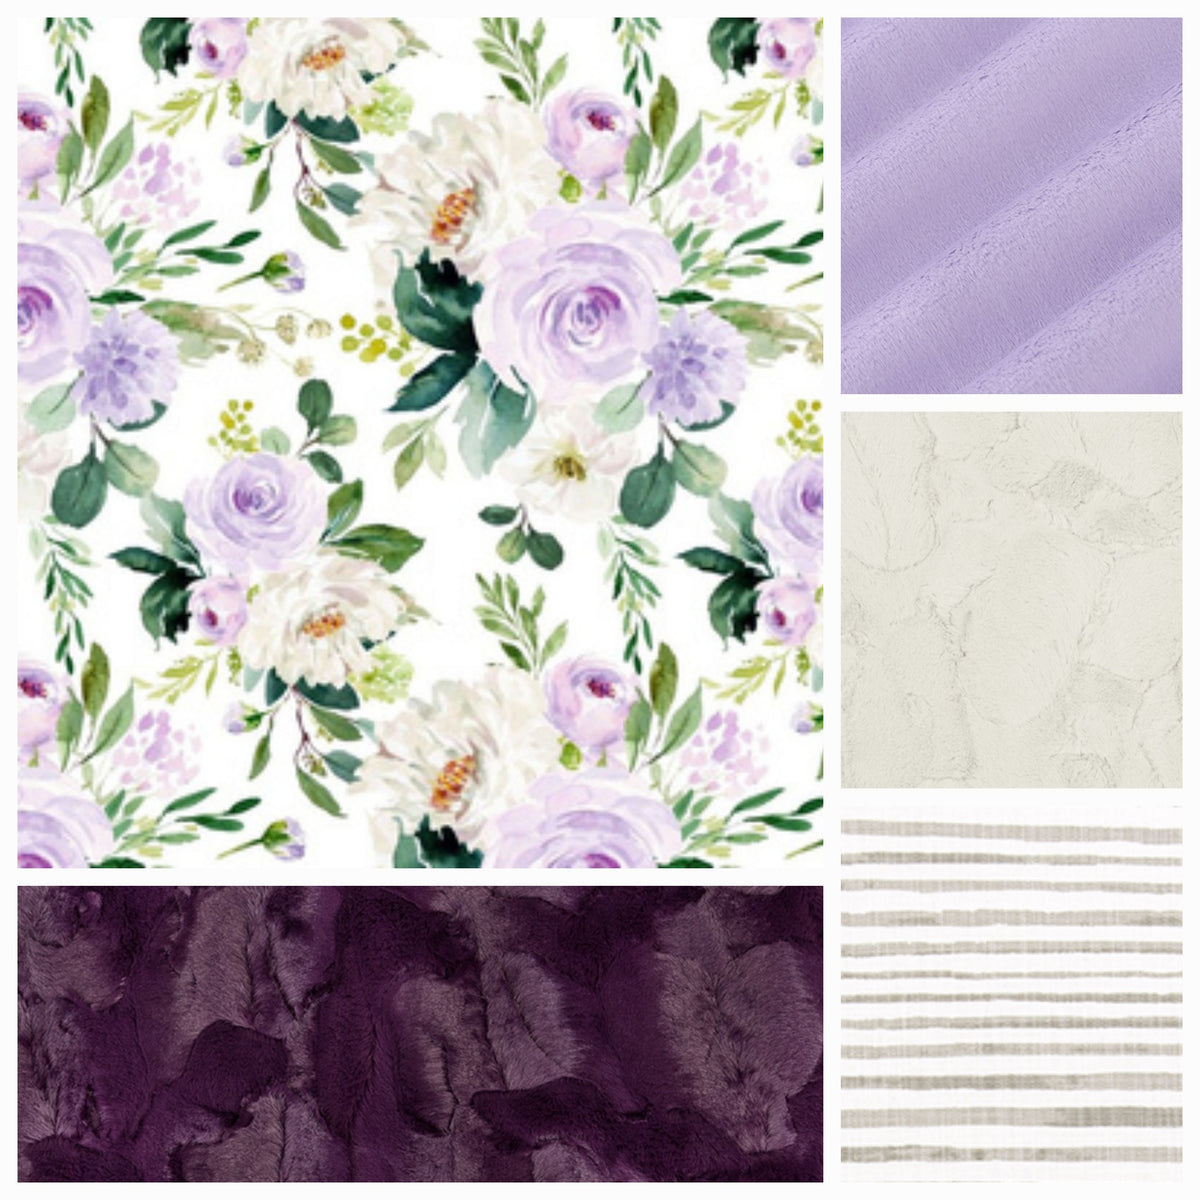 New Release Girl Crib Bedding- Lilac Rose Boho Floral and Sandstone Stripe Baby Bedding Collection - DBC Baby Bedding Co 